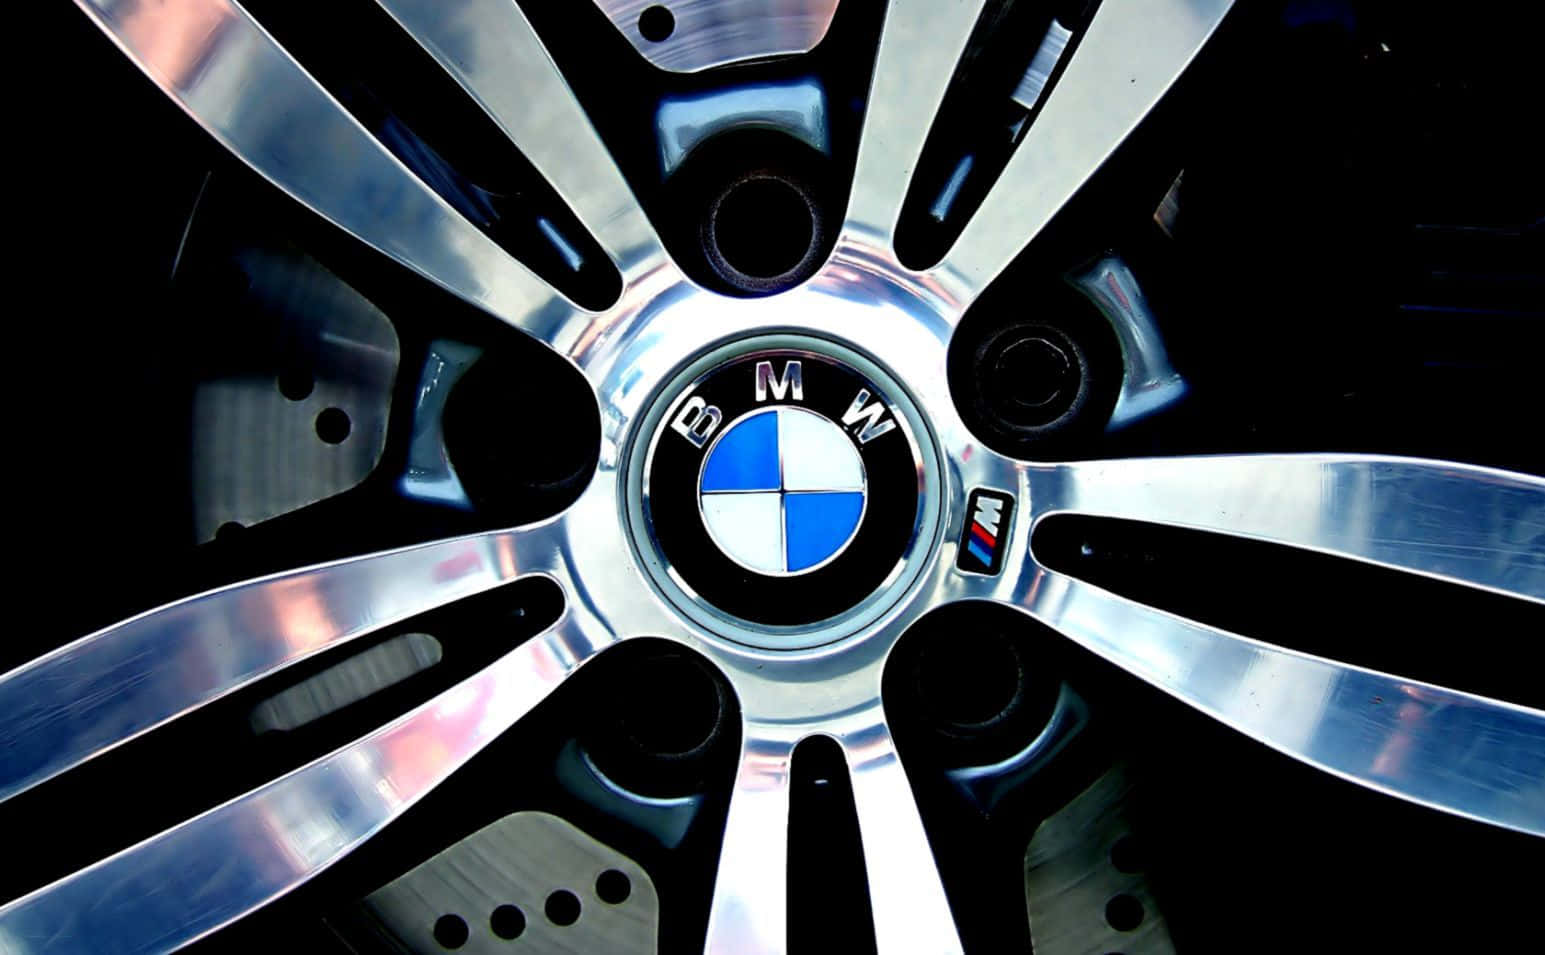 The Official Bmw Logo Against A Blue Background Wallpaper